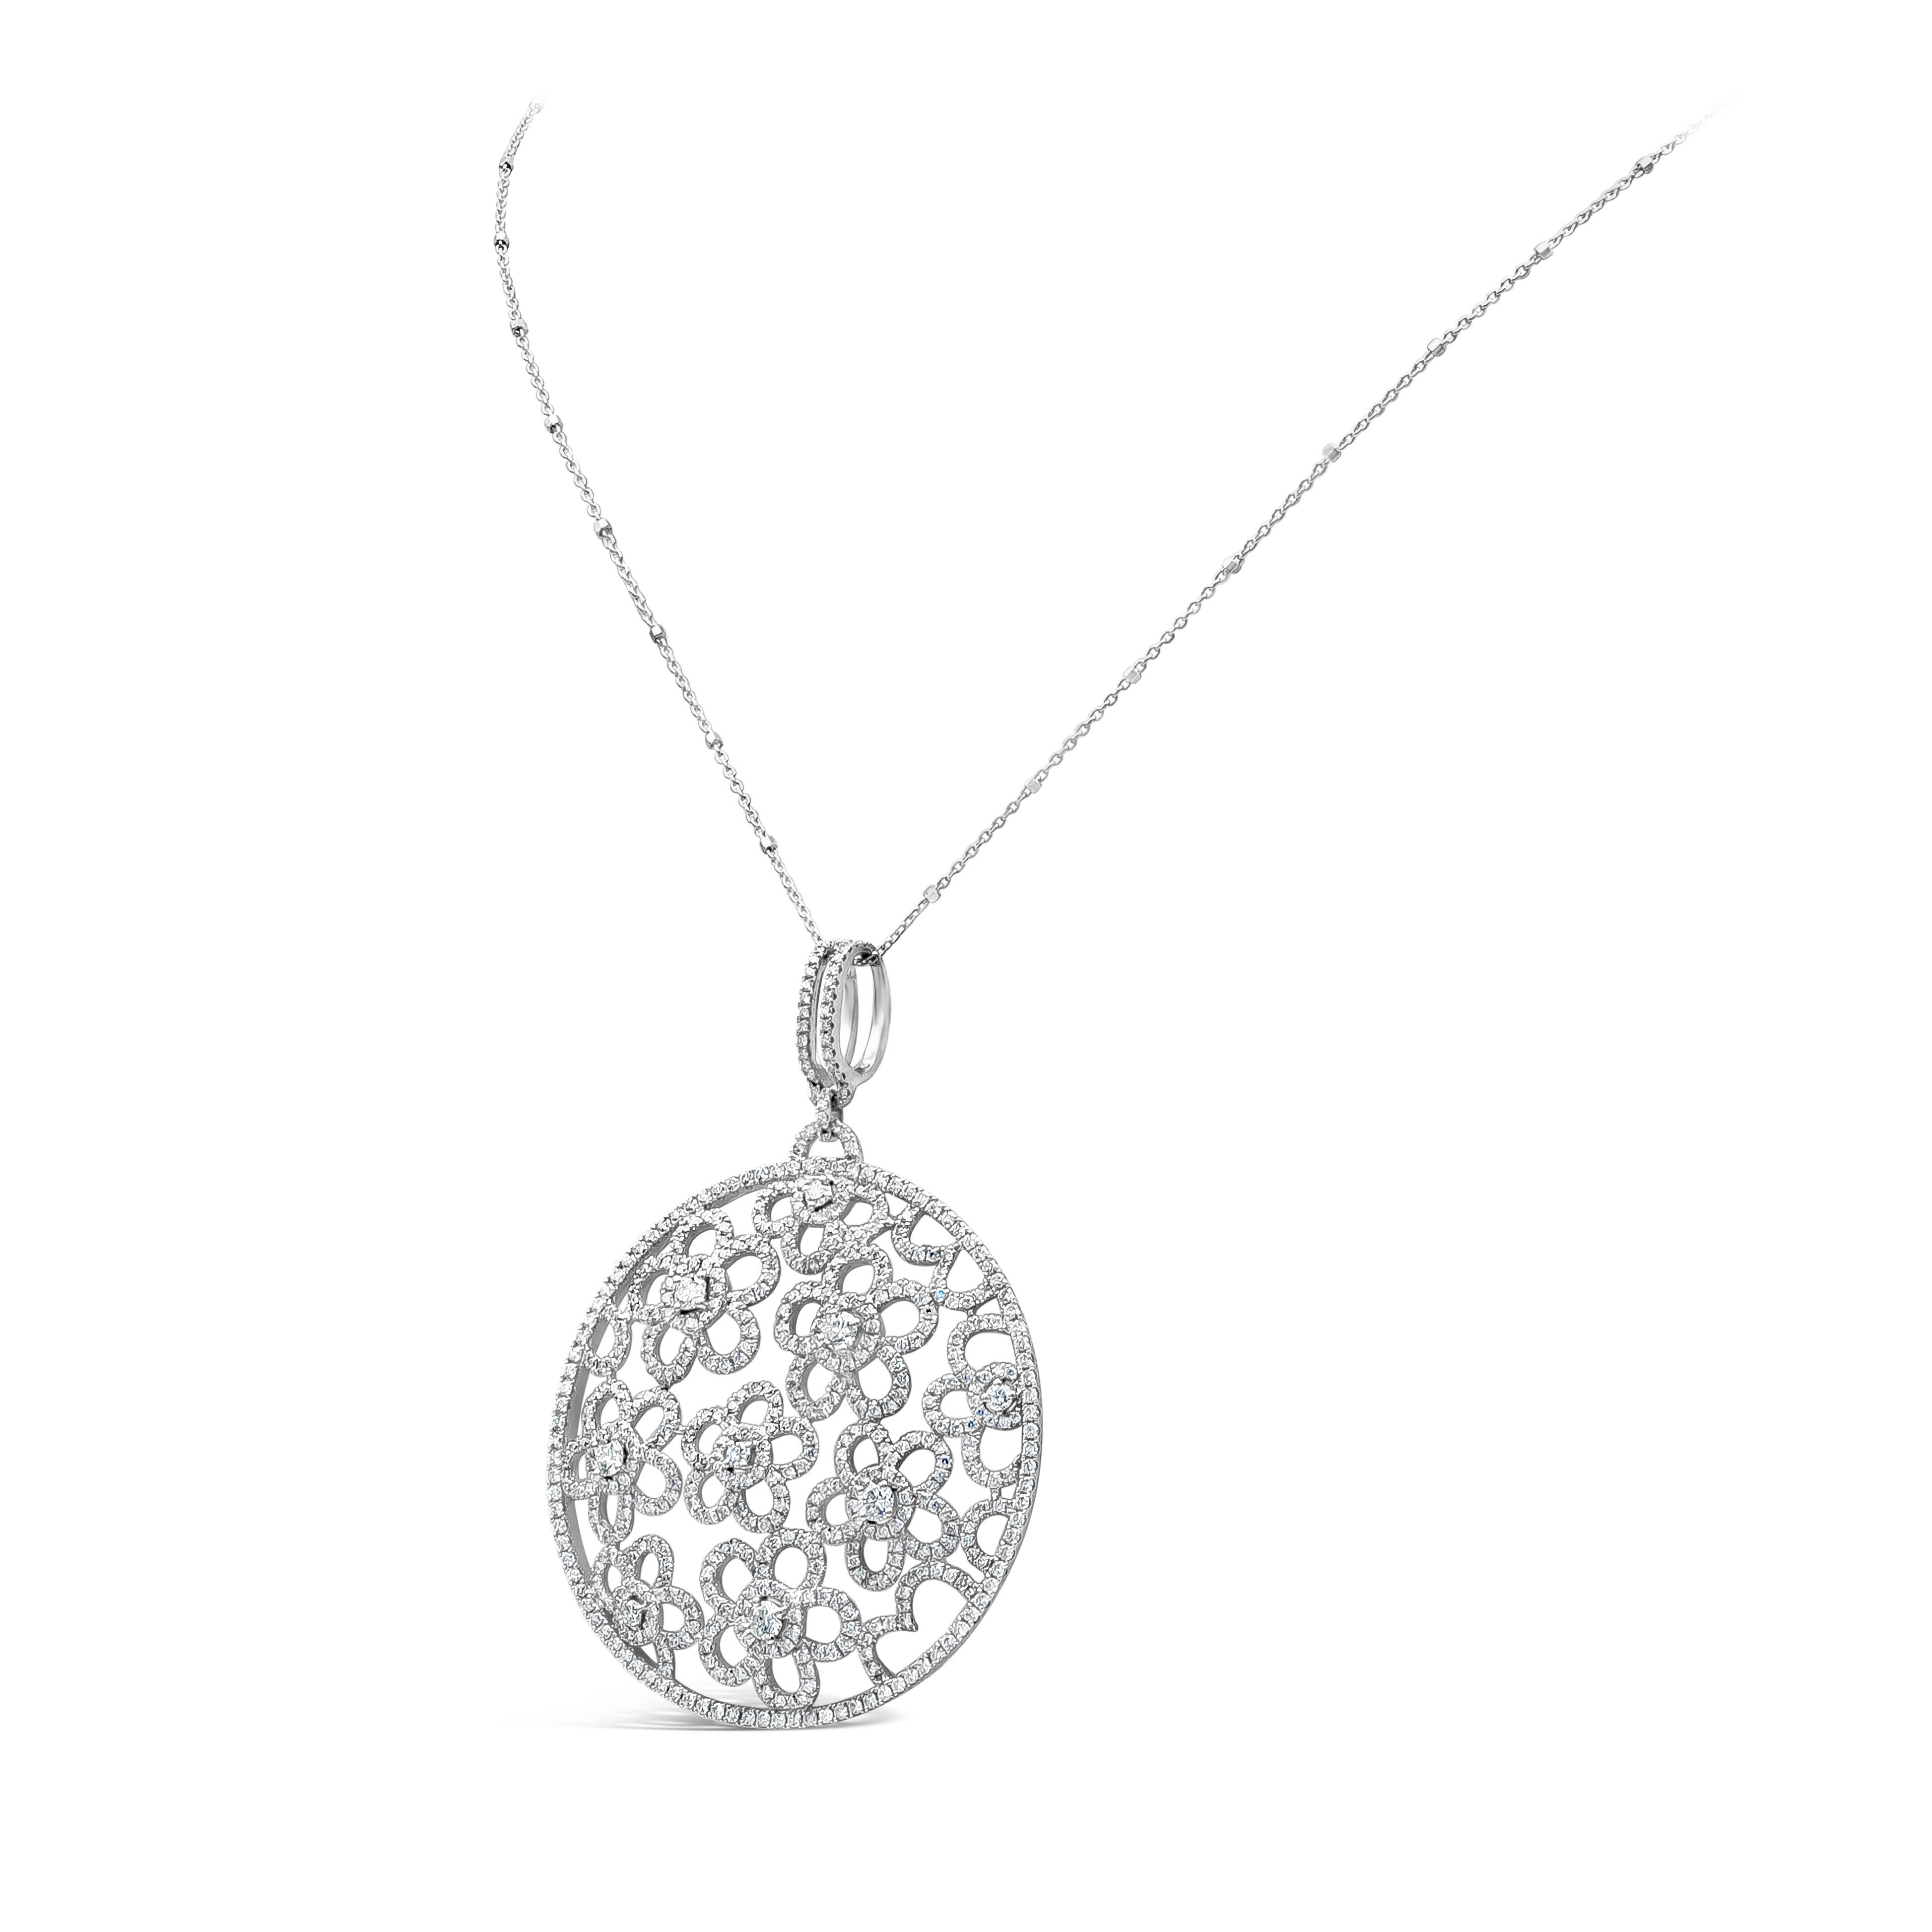 A stylish circular pendant necklace showcasing an open work floral-motif design, featuring 3.92 carats total of brilliant round diamonds. Set in micro-pave and prong setting, Made with 18K white Gold, suspended on 18 inches white gold chain. Chain